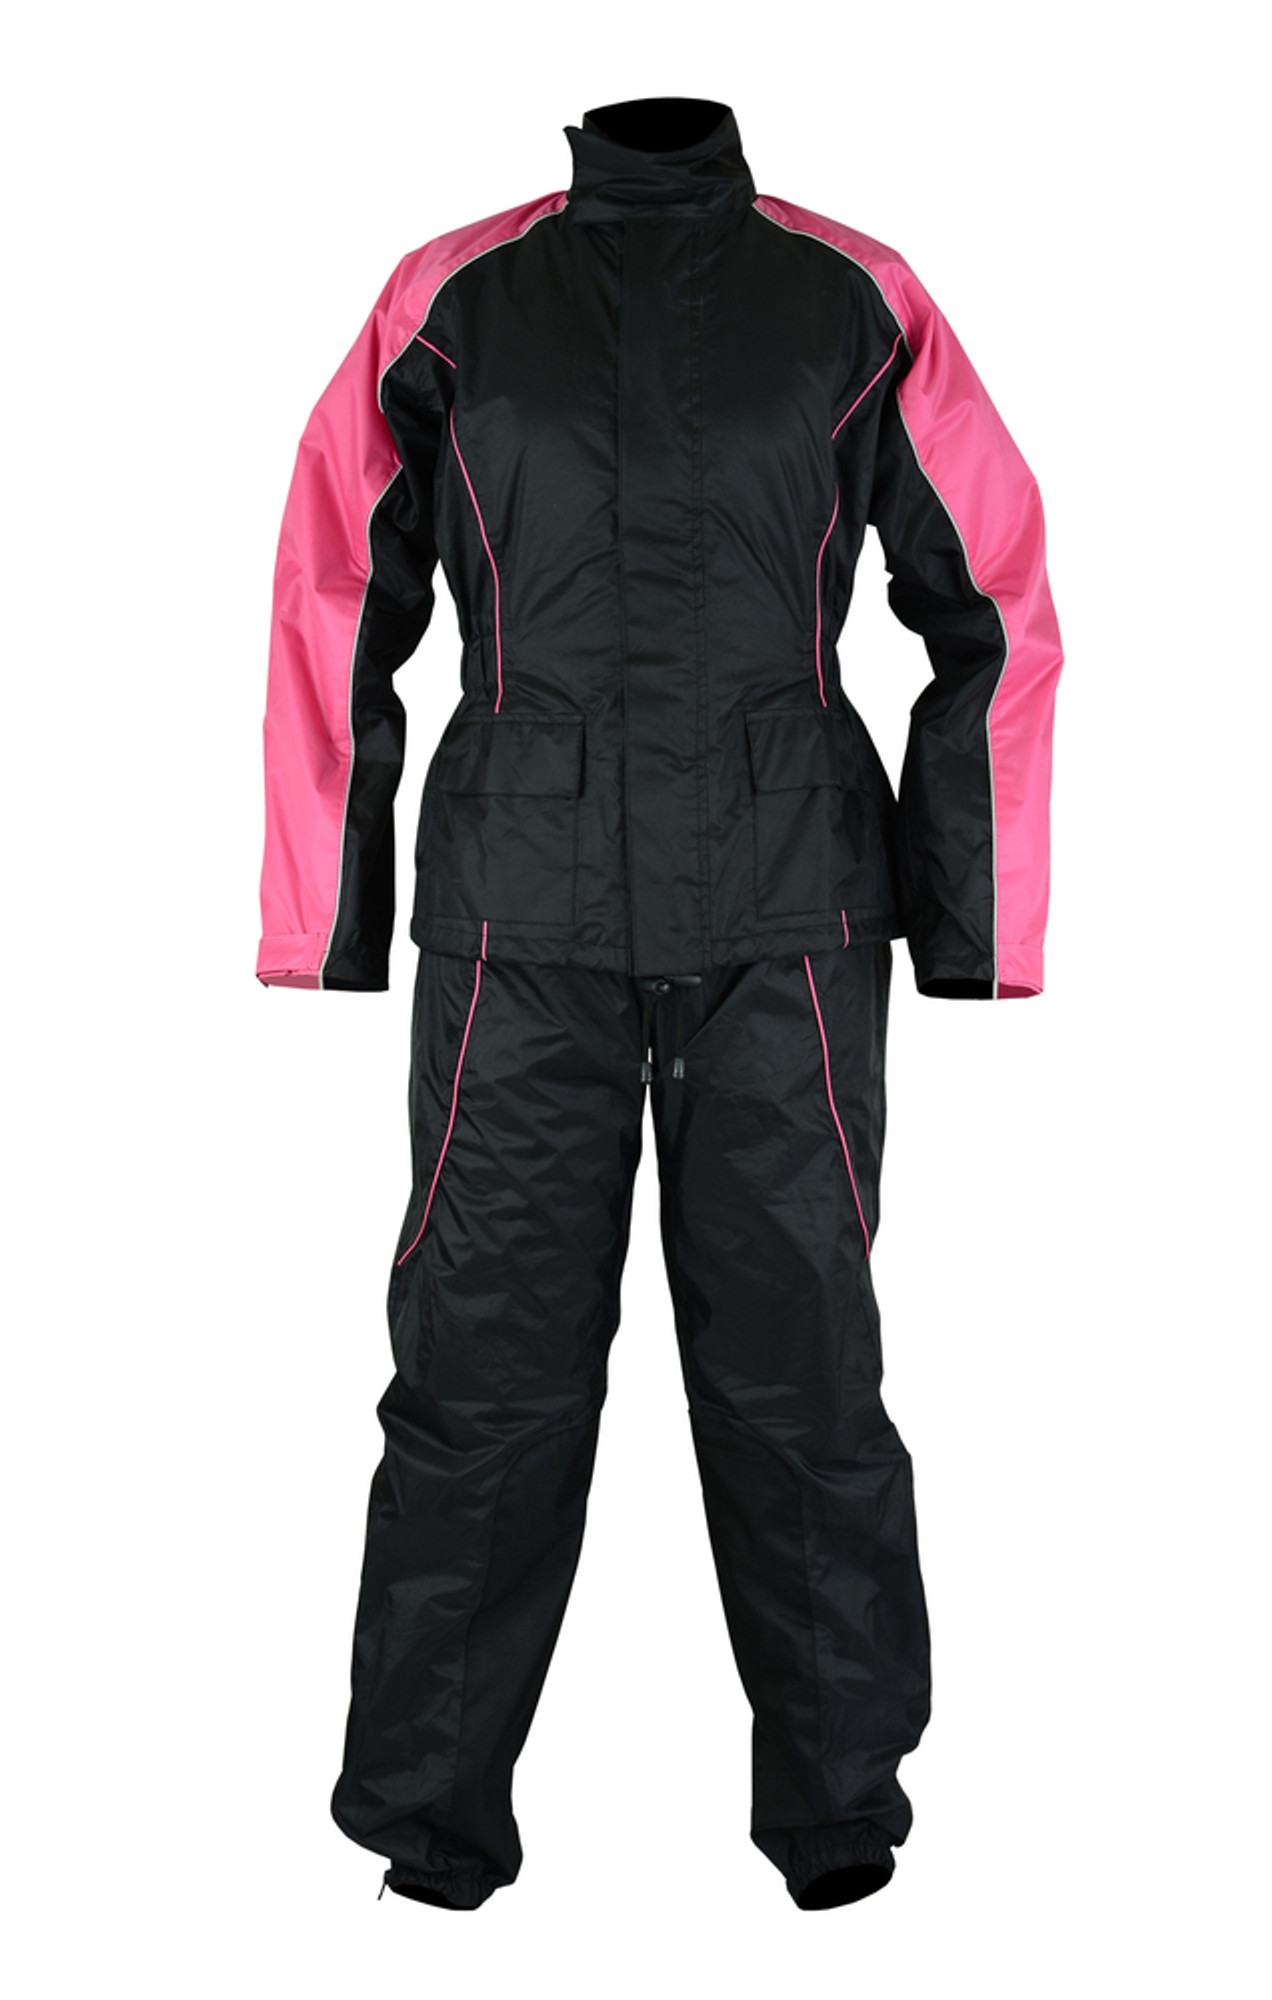 Women's Motorcycle Rain Gear Suit hot pink - SUNSET LEATHER